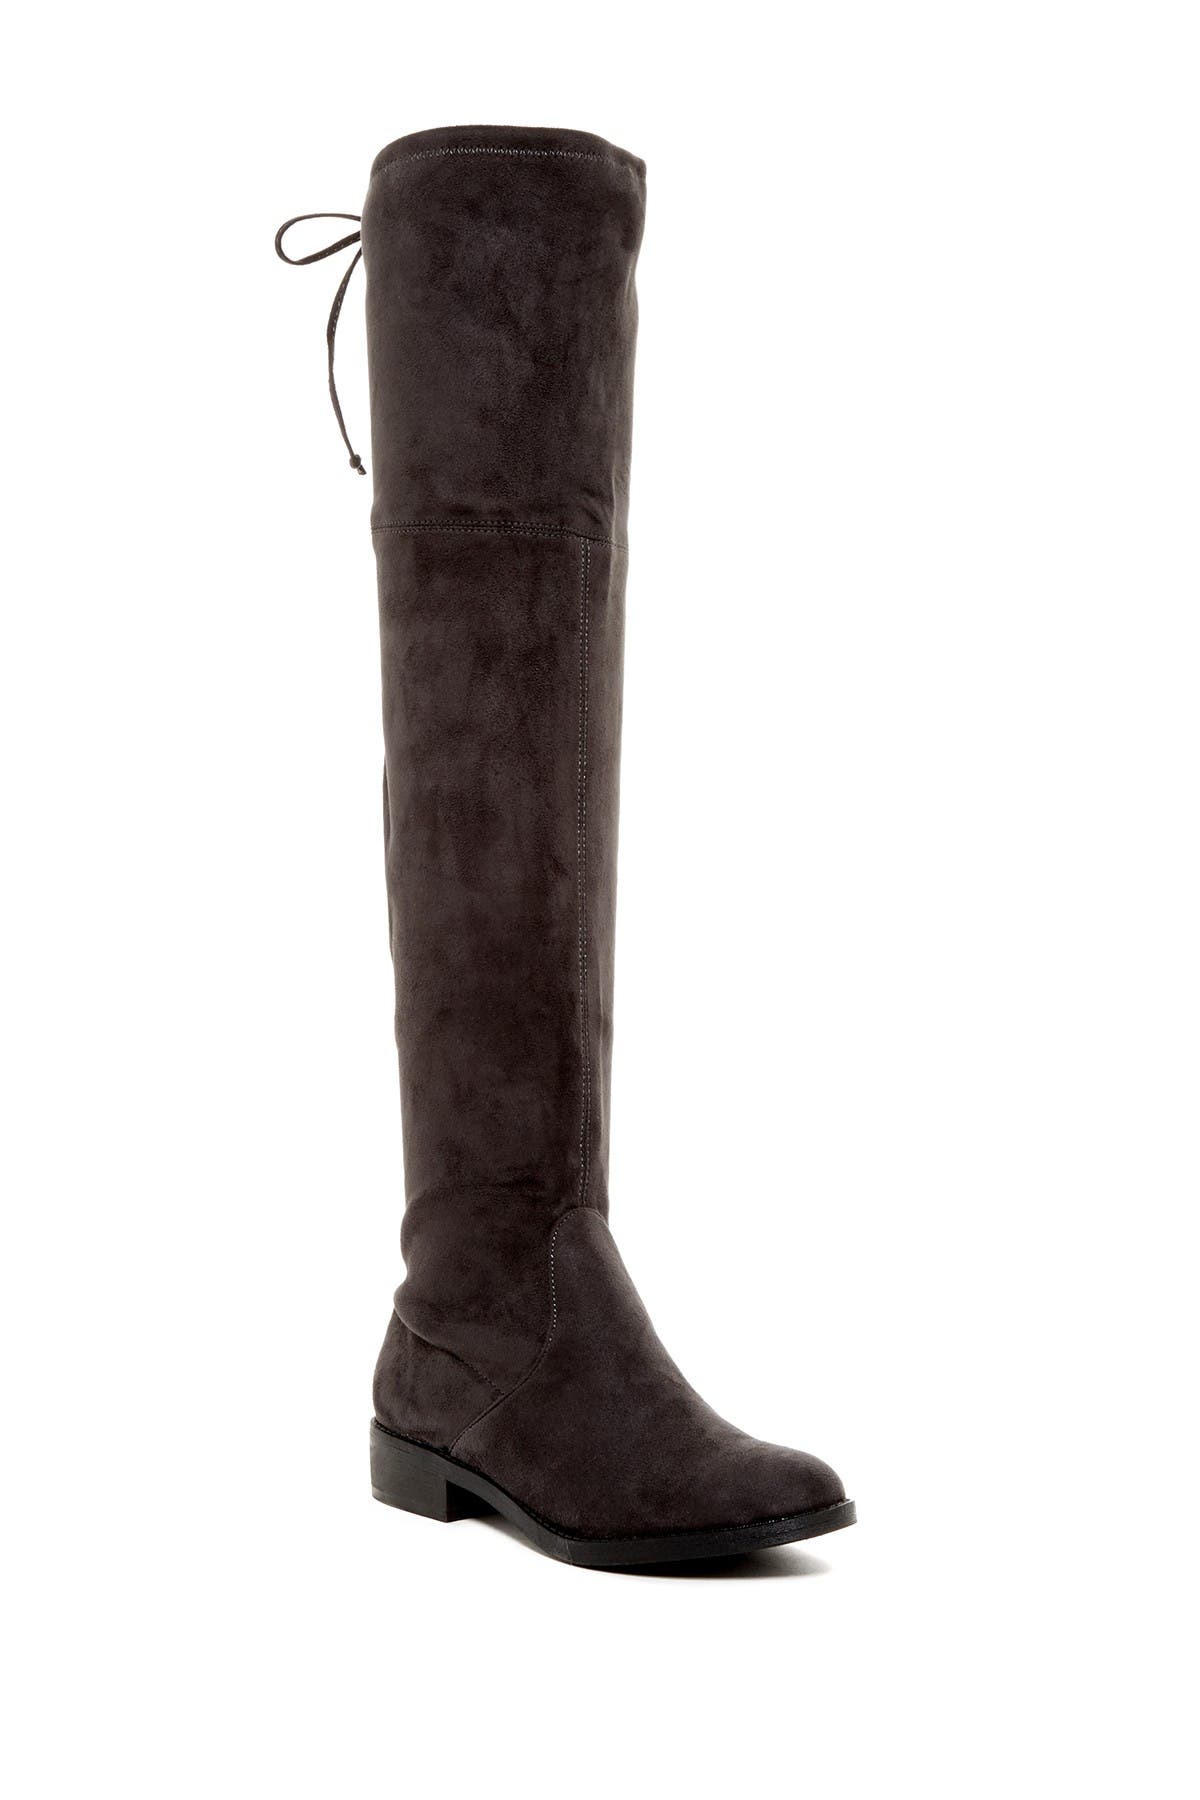 nordstrom rack tall boots